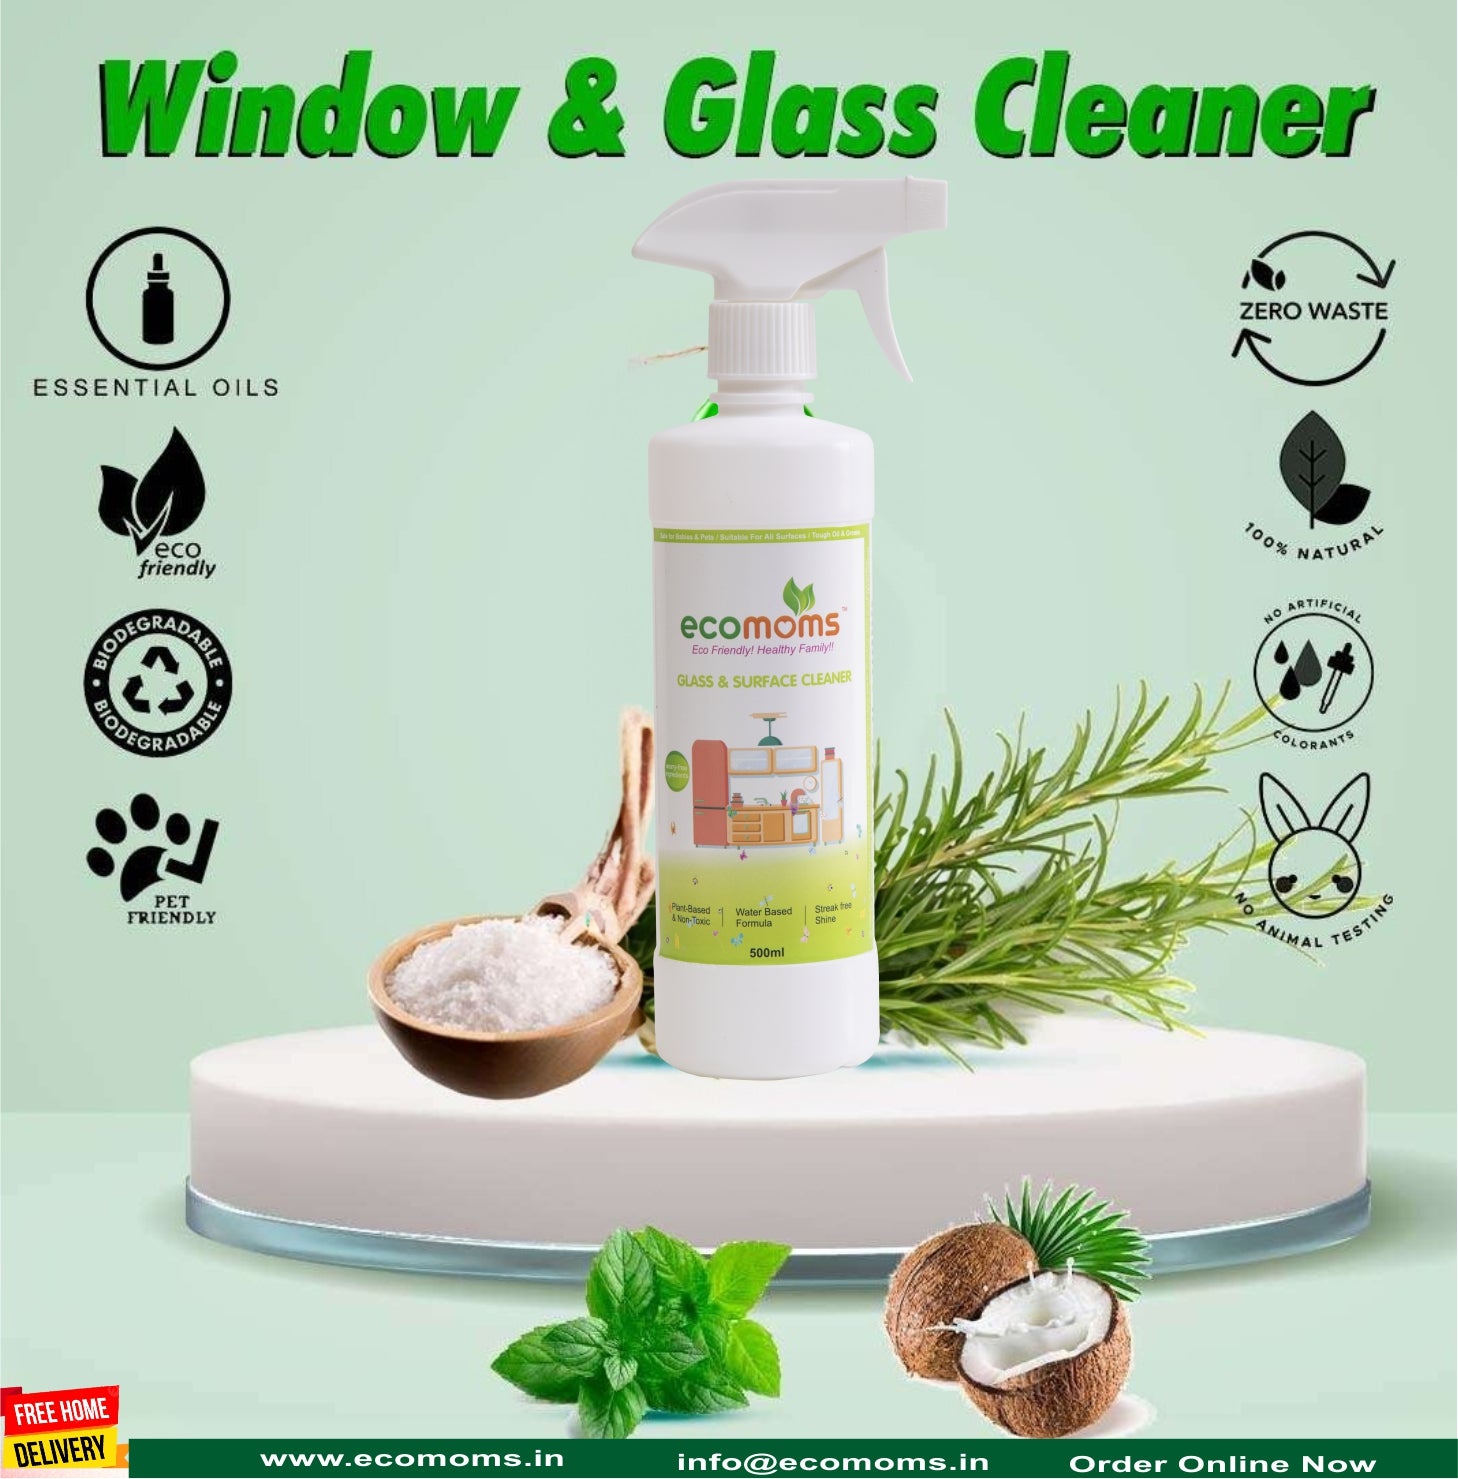 Ecomoms Non-Toxic Glass & Surface Liquid Cleaner , Eco-Friendly Solution for Car, Kitchen, Home, and Glass Surfaces,Pet and Baby Safe